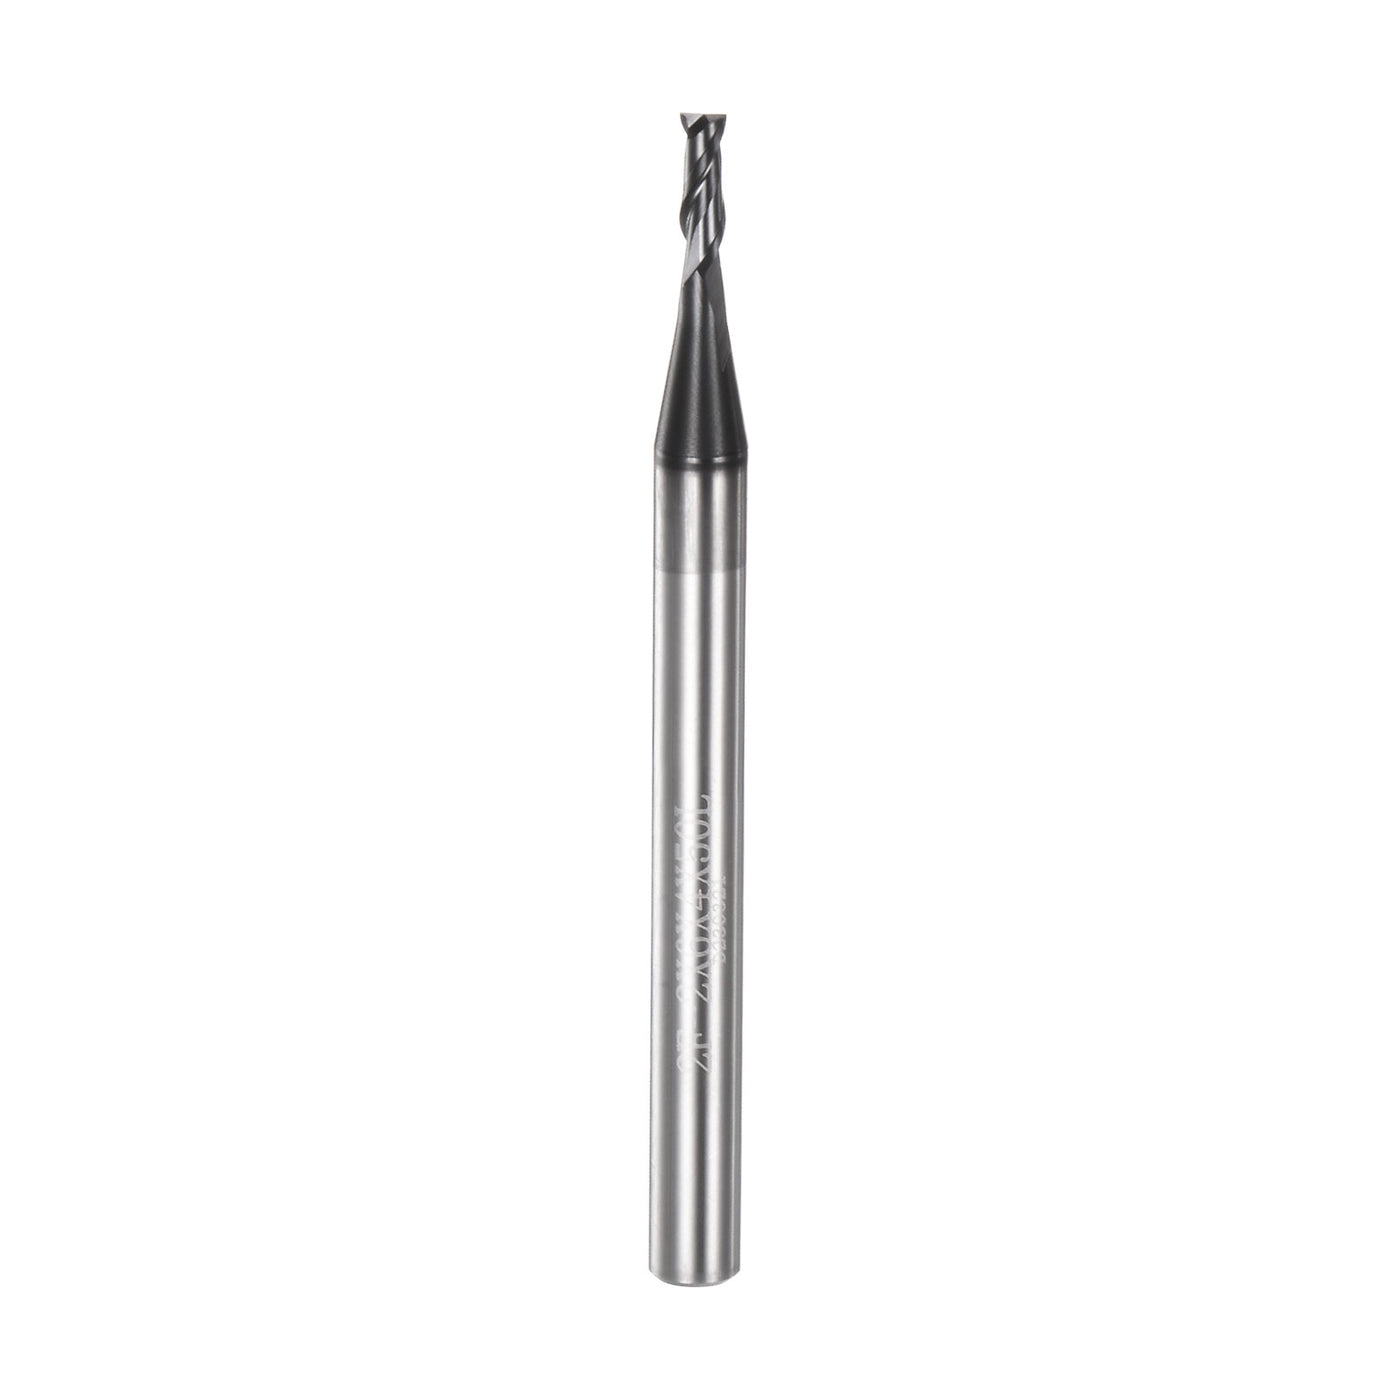 Harfington 2mm x 6mm x 4mm x 50mm Solid Carbide AlTiN Coated 2 Flute Square End Mill Bit